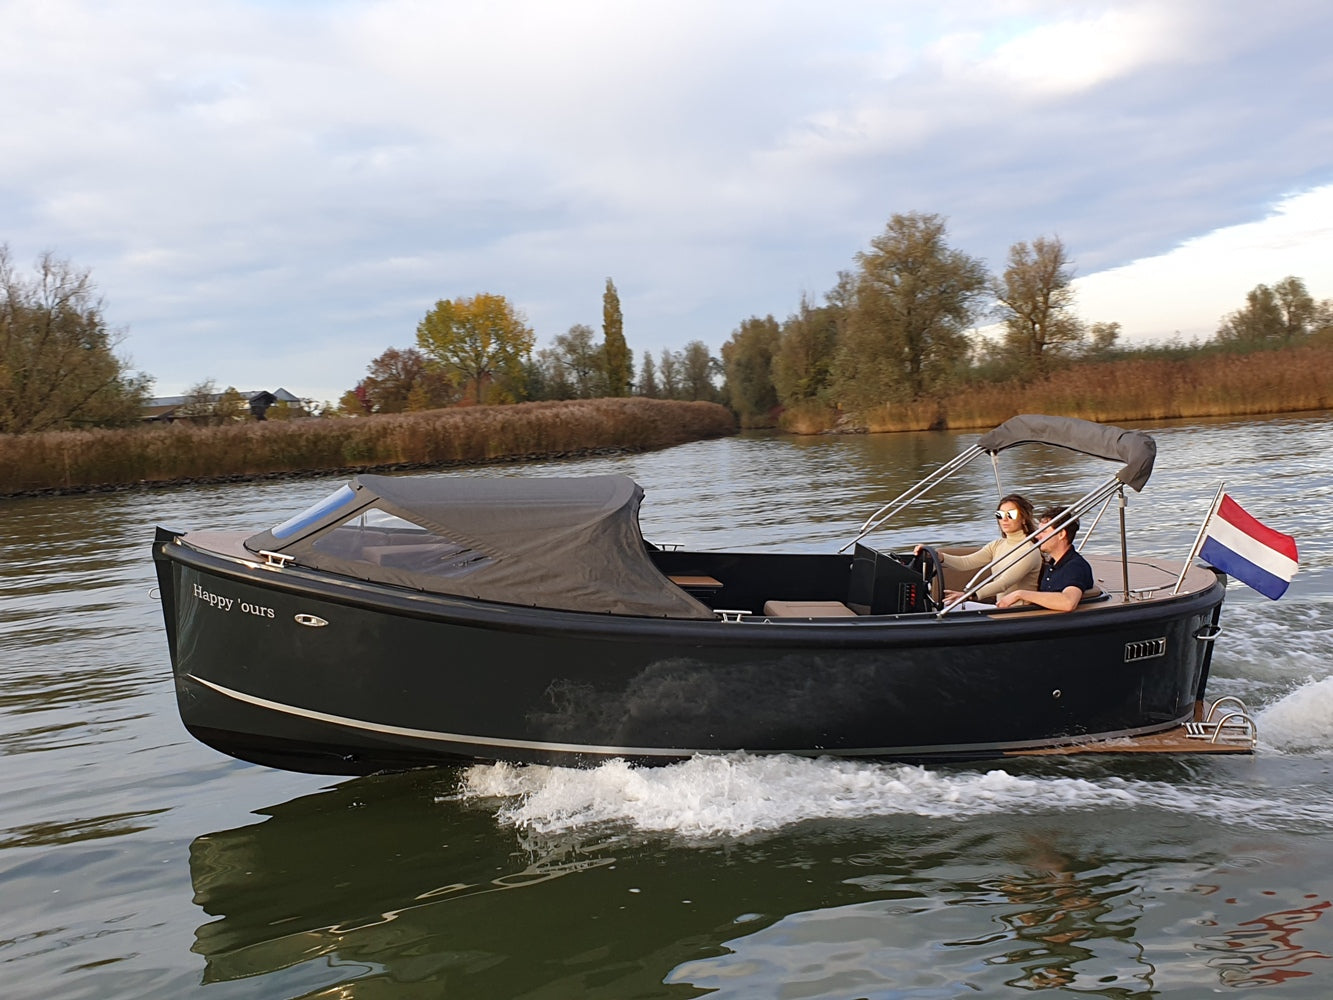 Maxima 650 Flying Lounge Powered by Honda BF50 LRTU 50hp In Stock Now